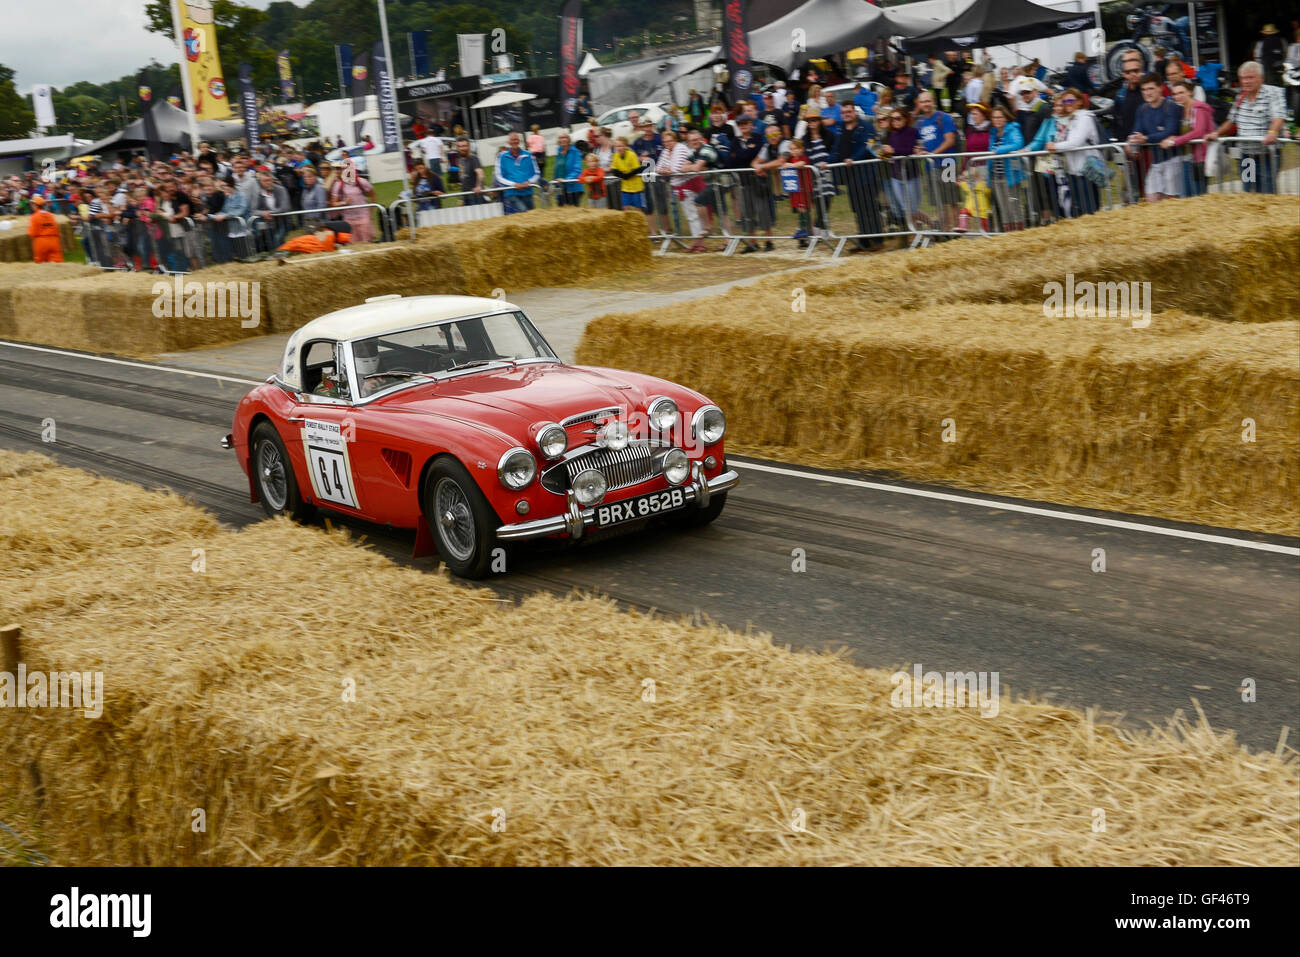 Bolesworth, Cheshire, UK. 29th July 2016. An Austin Healy being driven round the track. The event is the brainchild of Chris Evans and features 3 days of cars, music and entertainment with profits being donated to the charity Children in Need. Credit:  Andrew Paterson/Alamy Live News Stock Photo